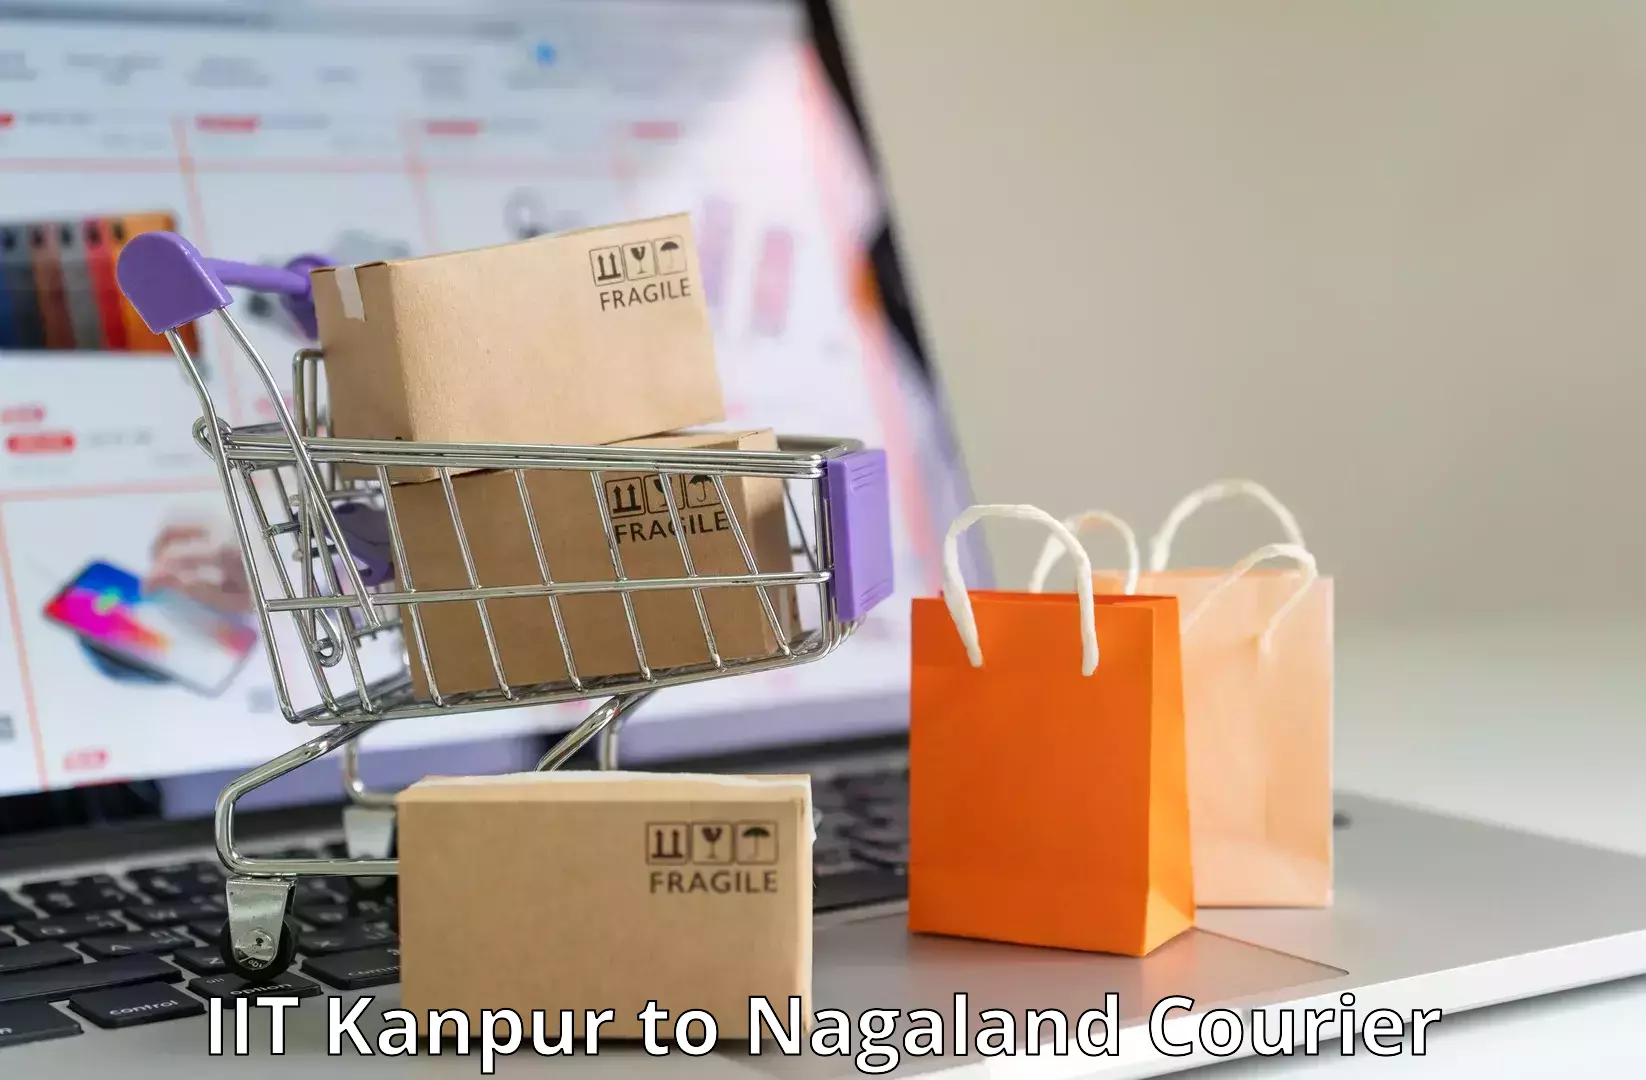 Urban courier service IIT Kanpur to Nagaland